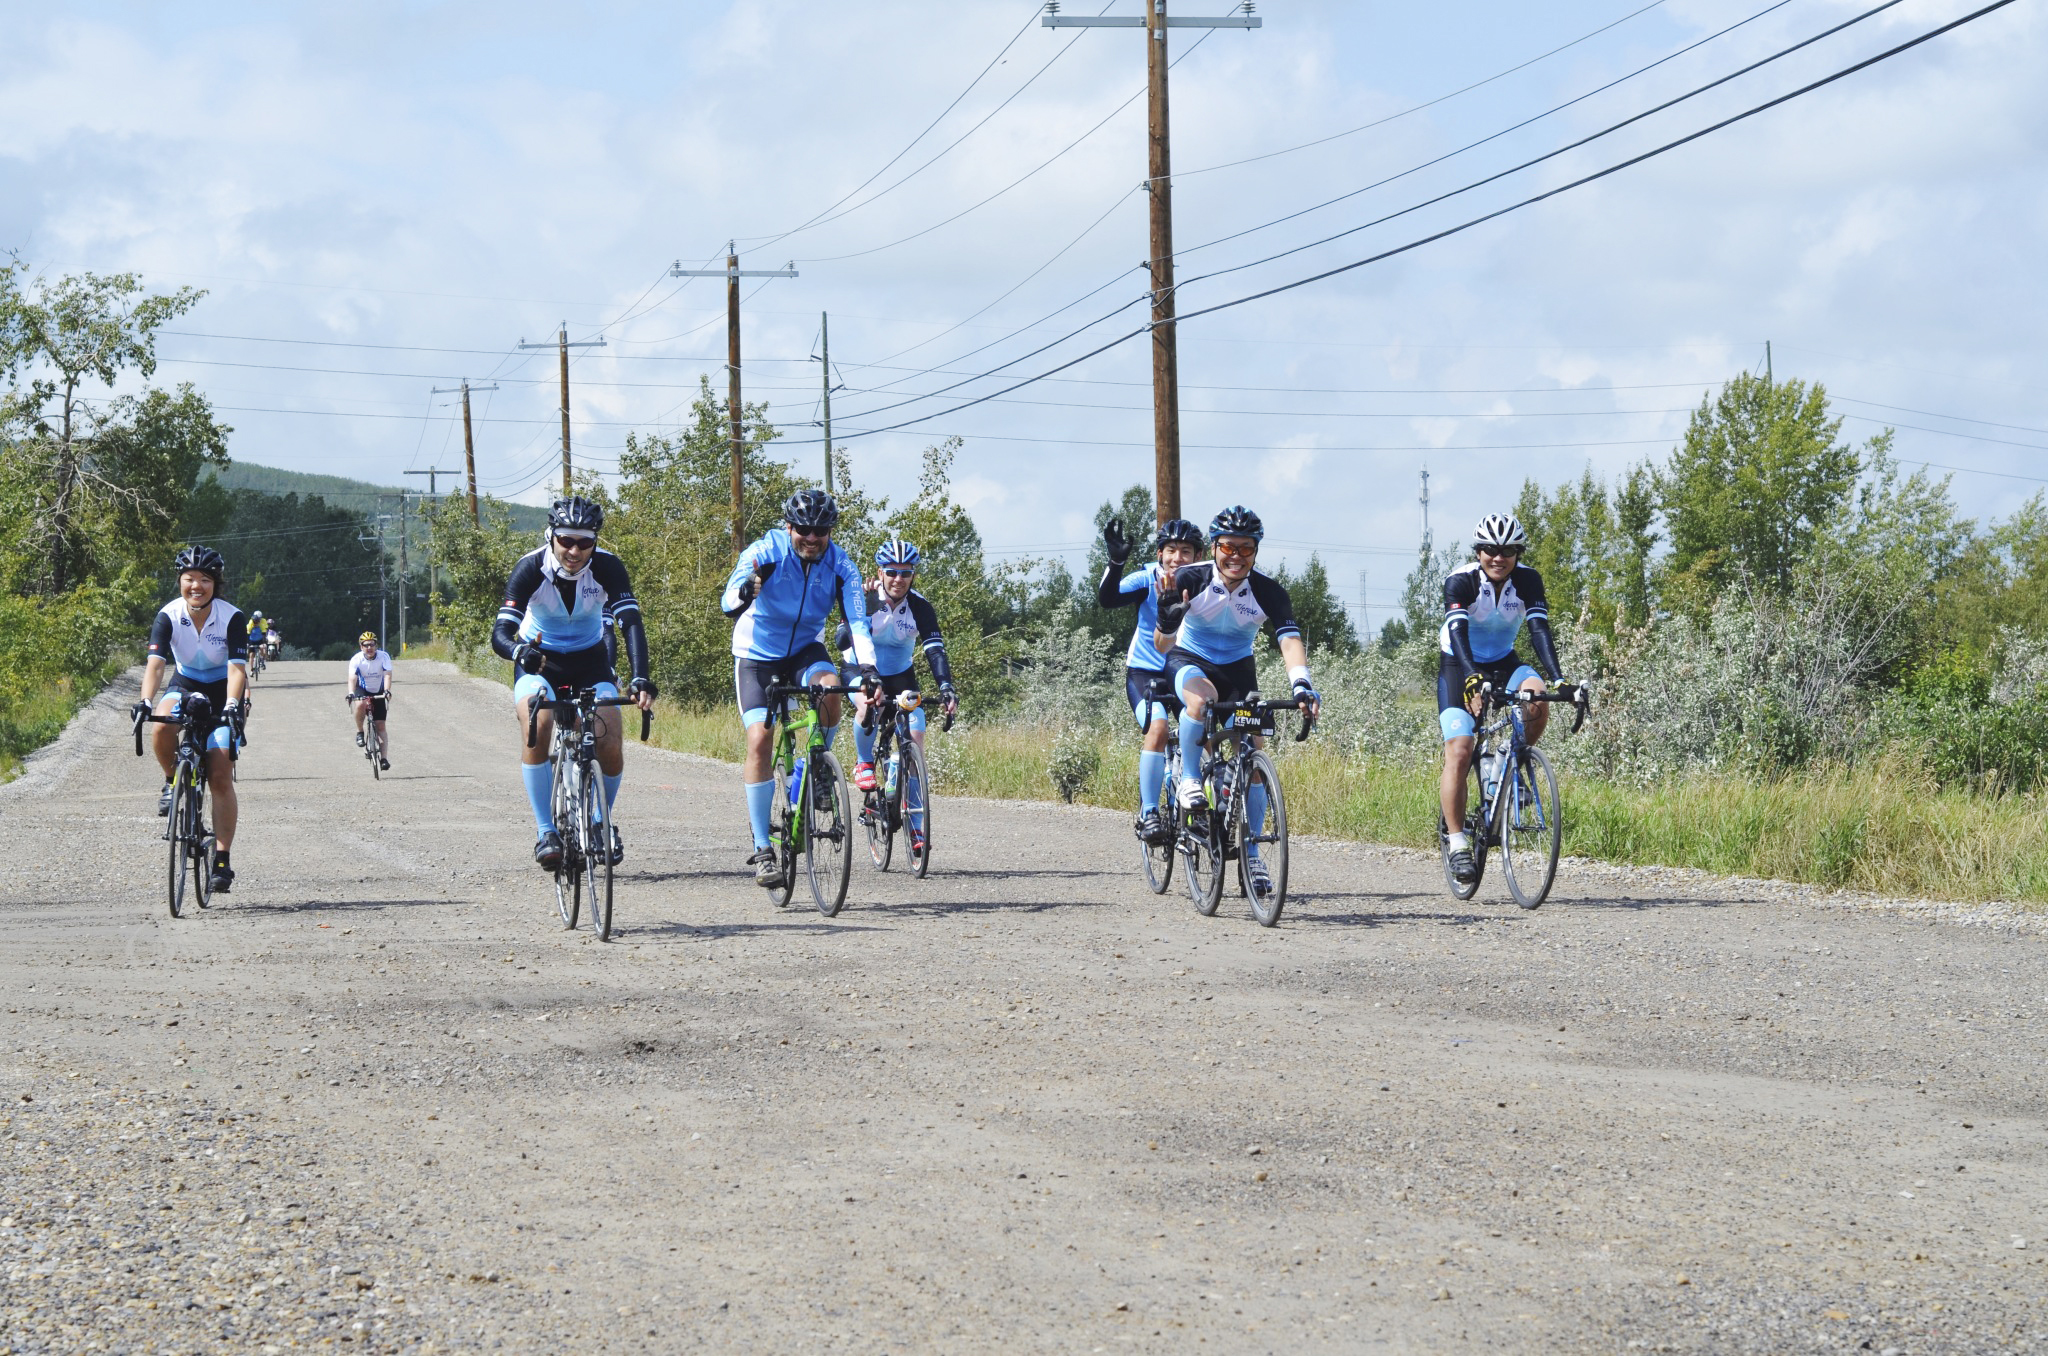 Nine Reinvent employees cycling while wearing blue and white team uniforms